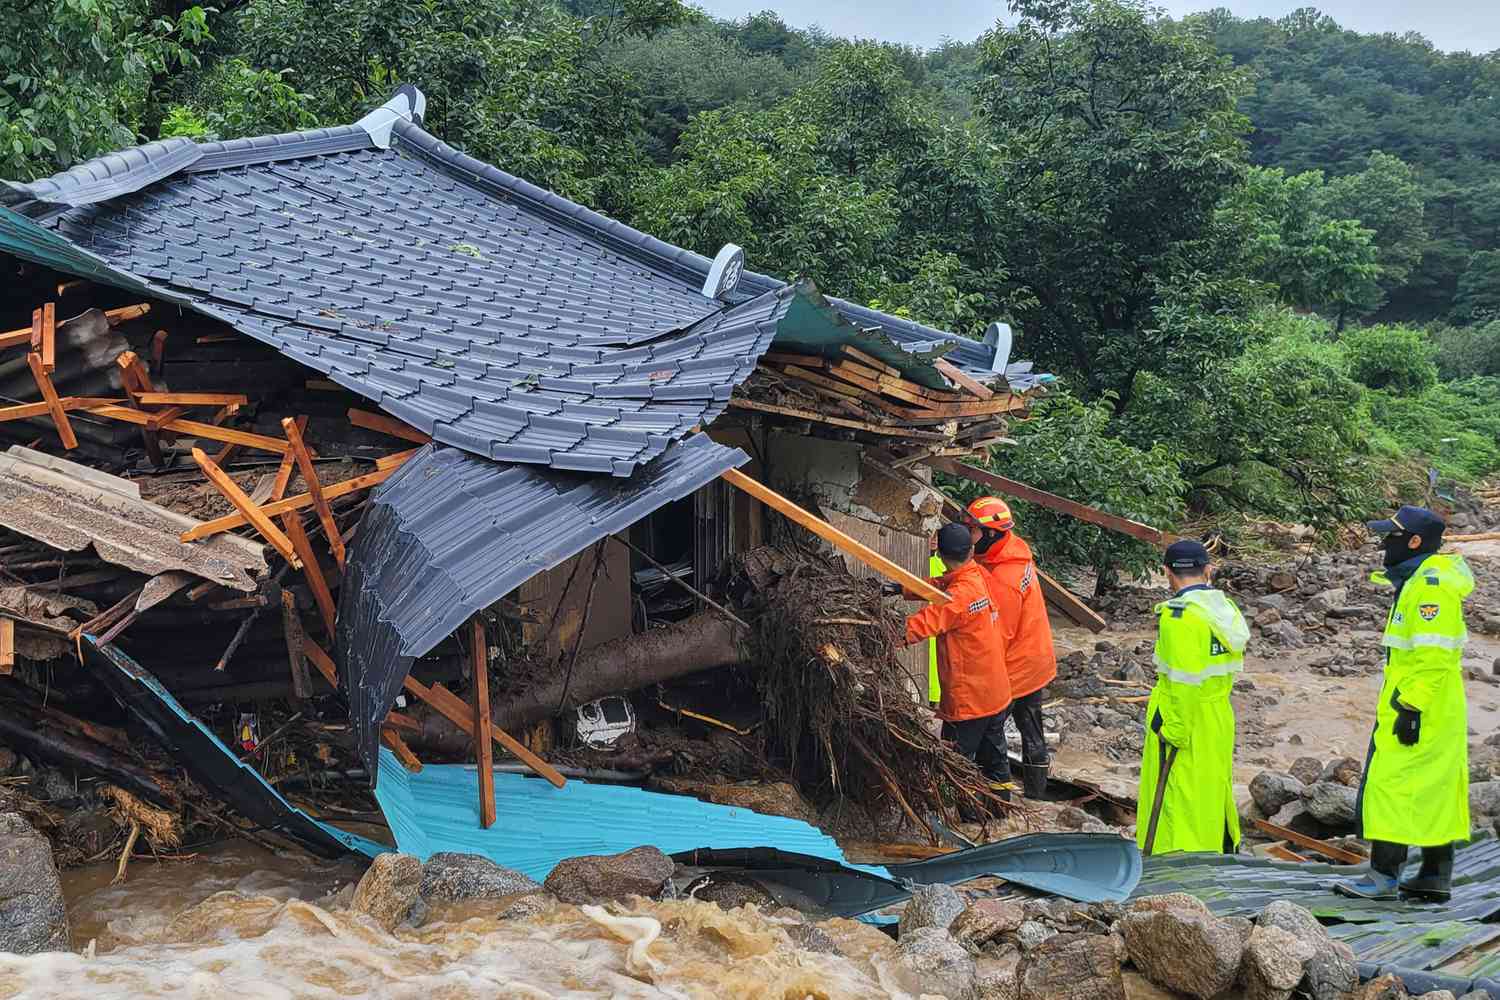 South Korea: Landslides and floods due to heavy rain kills 26, thousand rescued